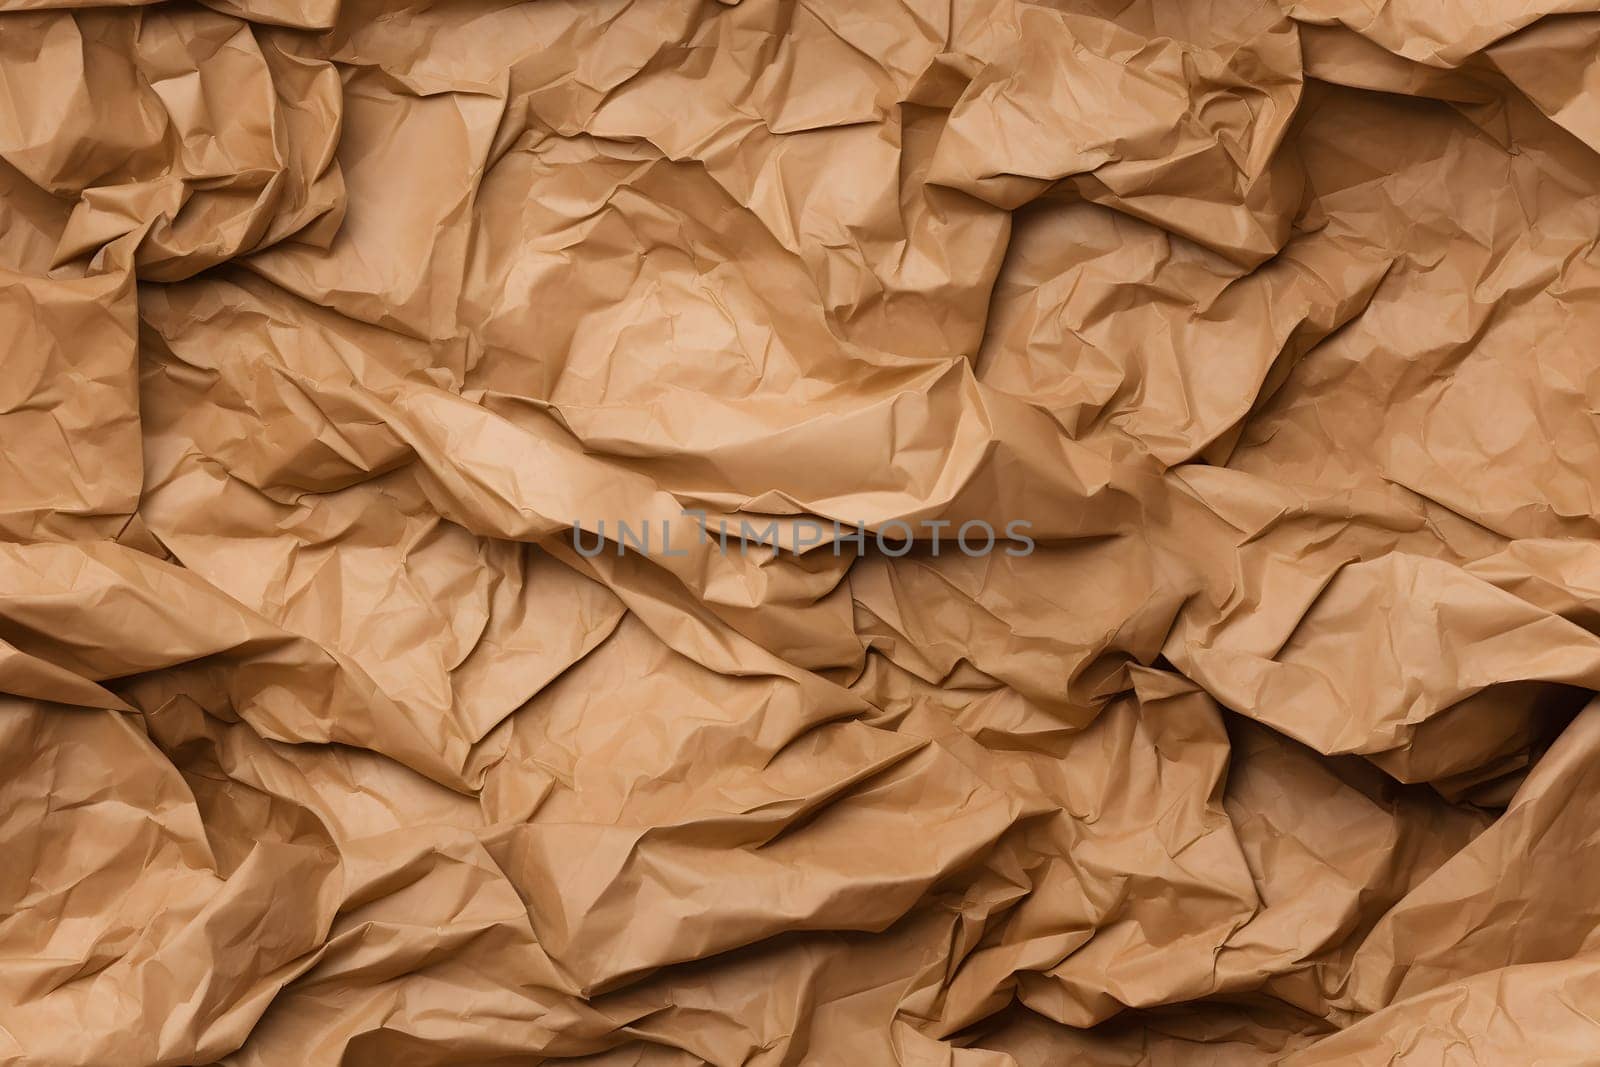 Crumpled brown paper seamless texture and background, neural network generated photorealistic image by z1b